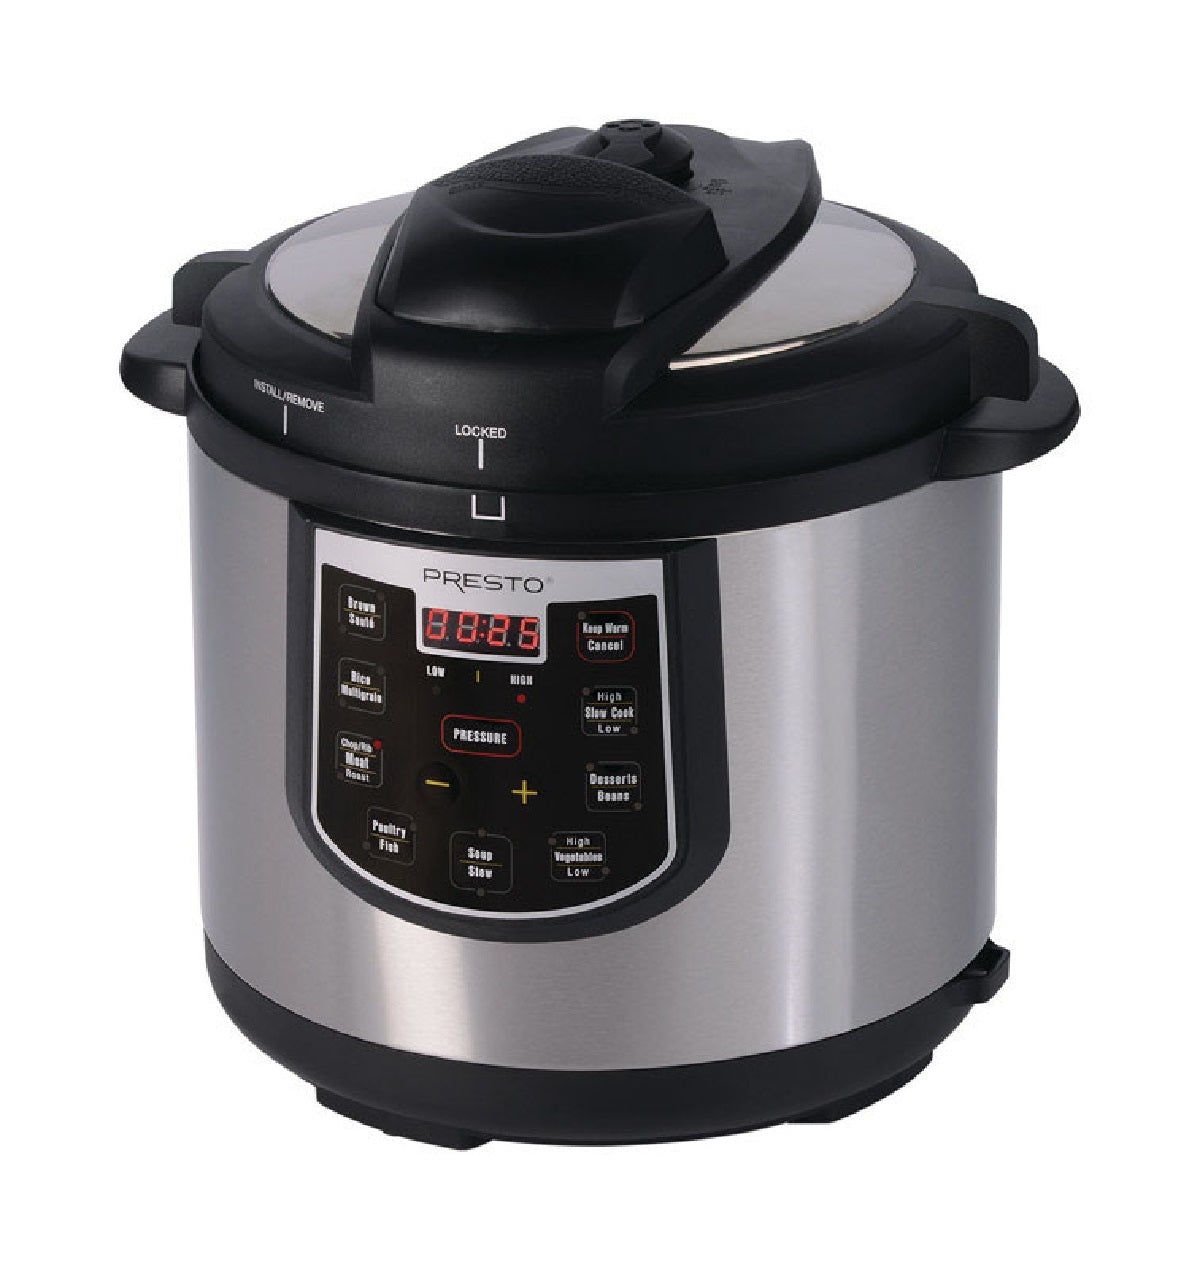 buy pressure cookers & canners at cheap rate in bulk. wholesale & retail professional kitchen tools store.